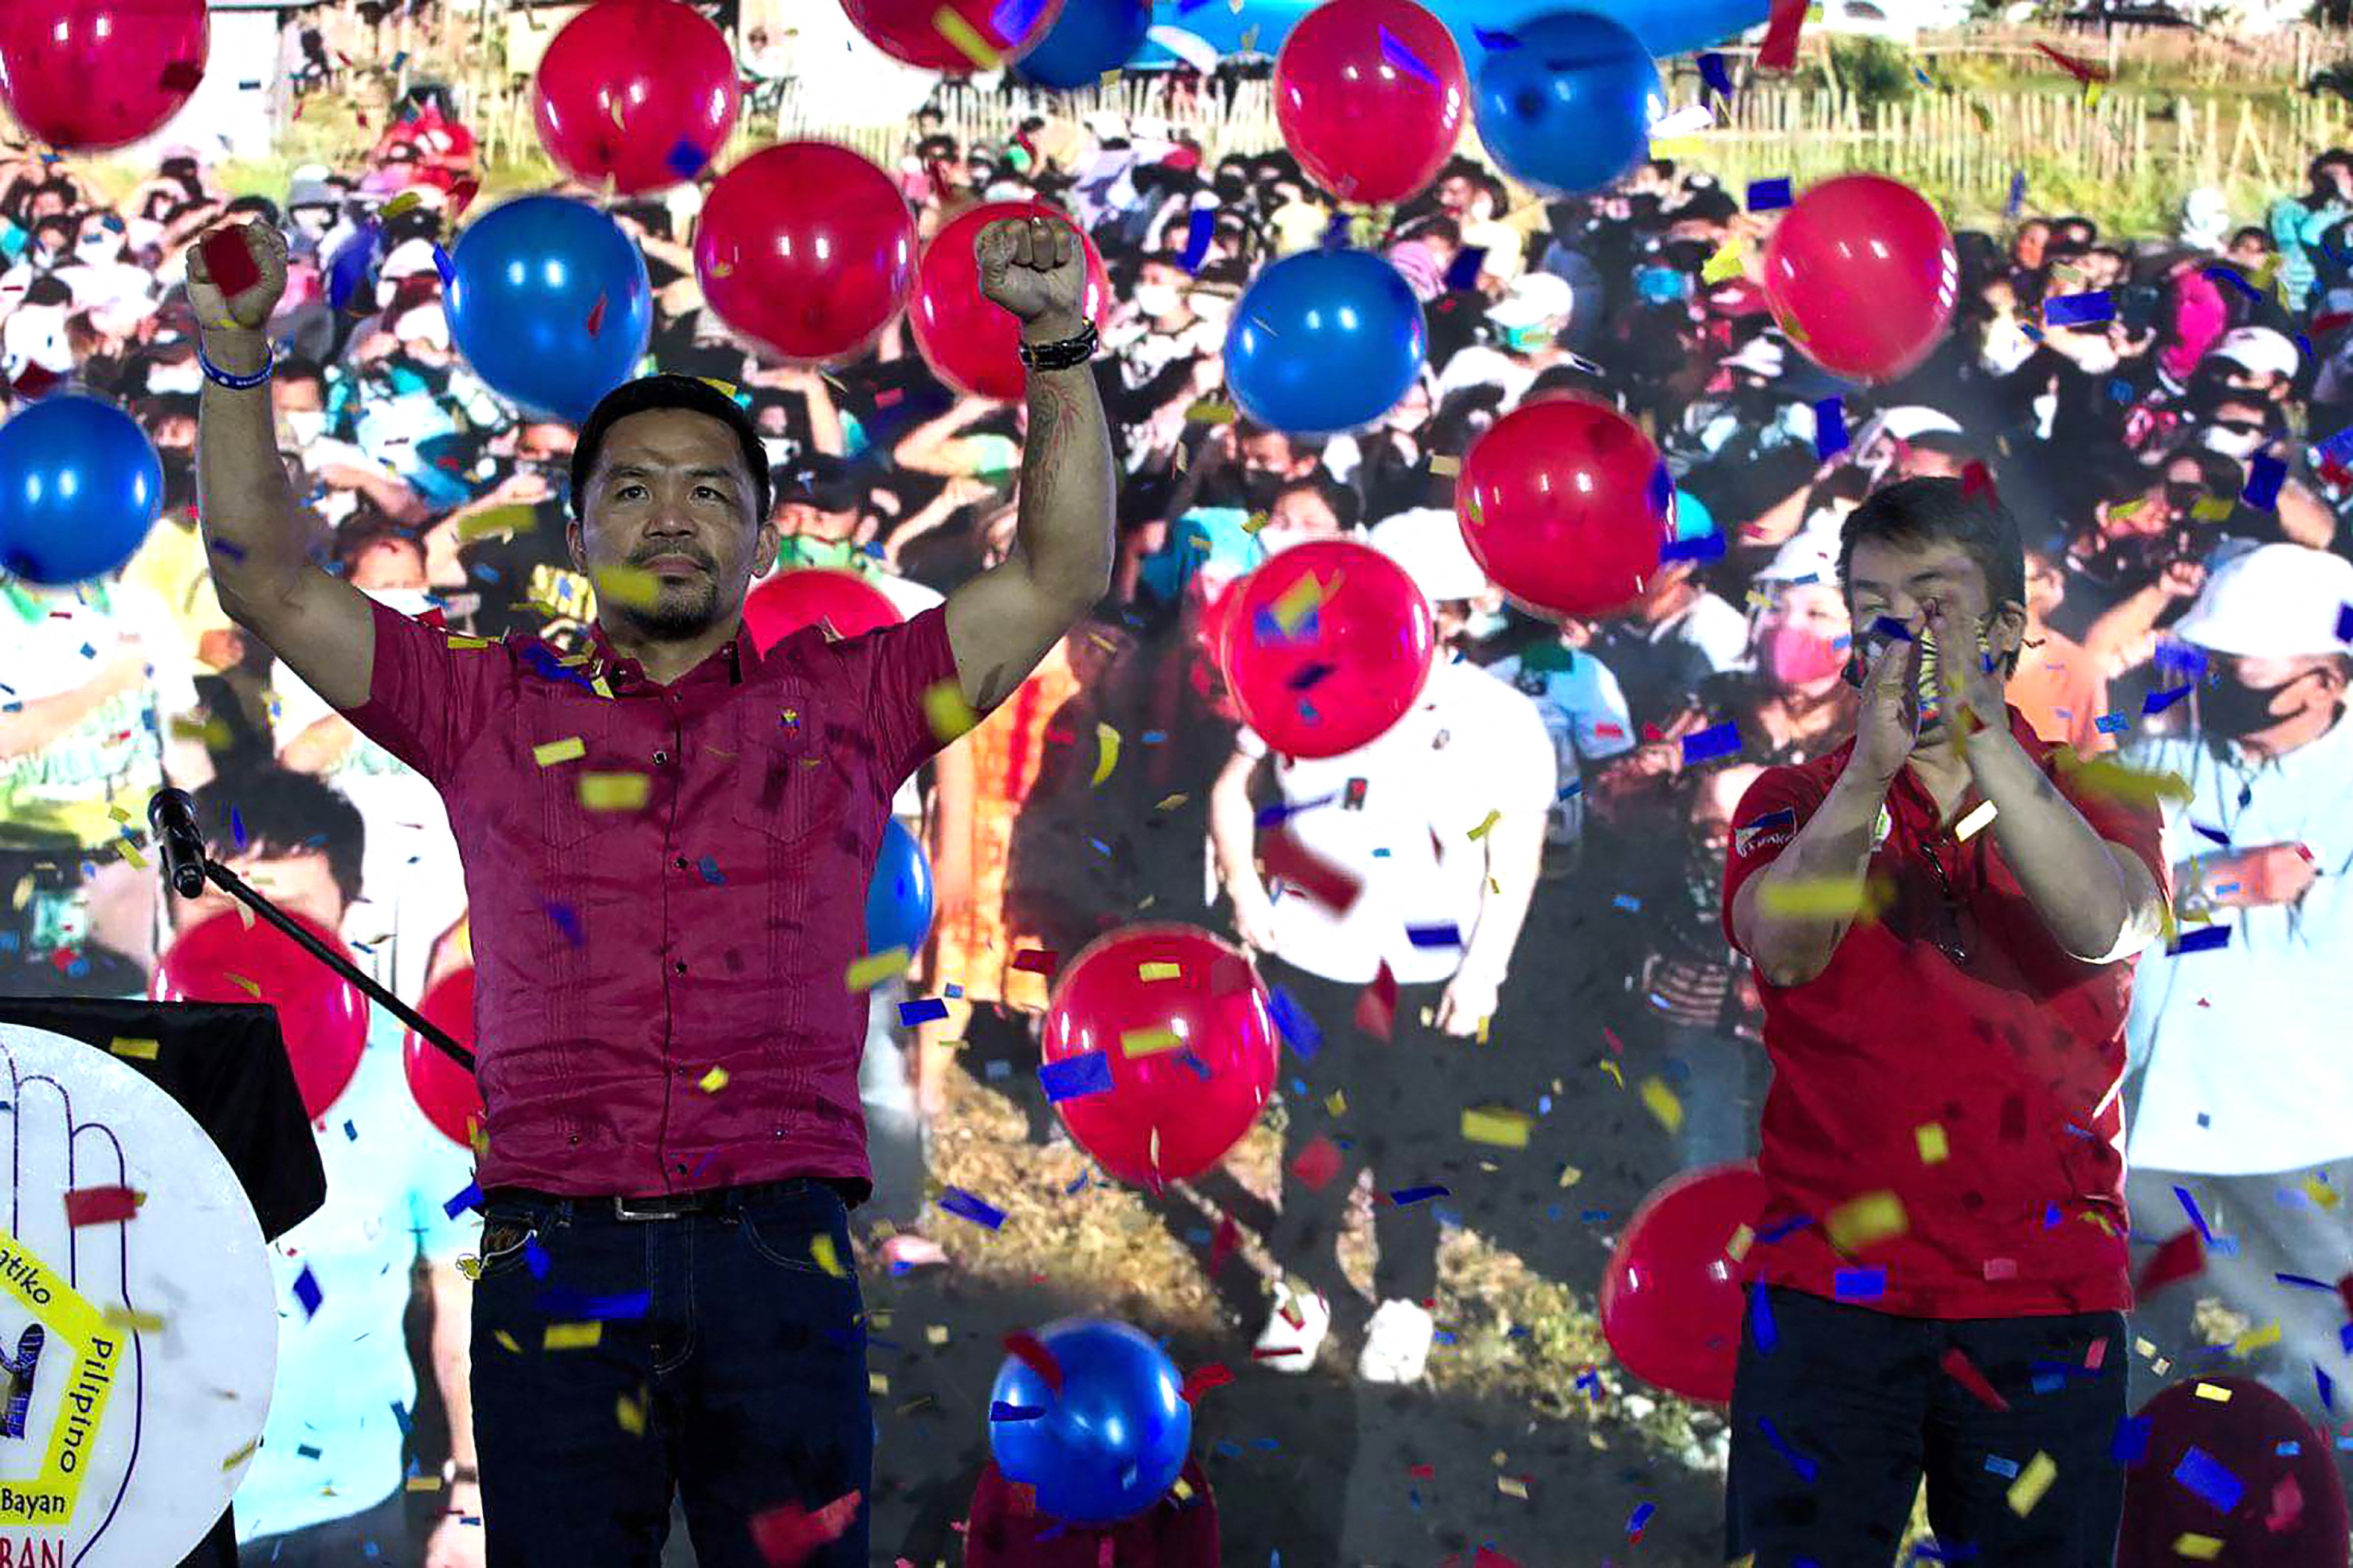 Philippine presidential candidate Manny Pacquiao. Photo: AFP